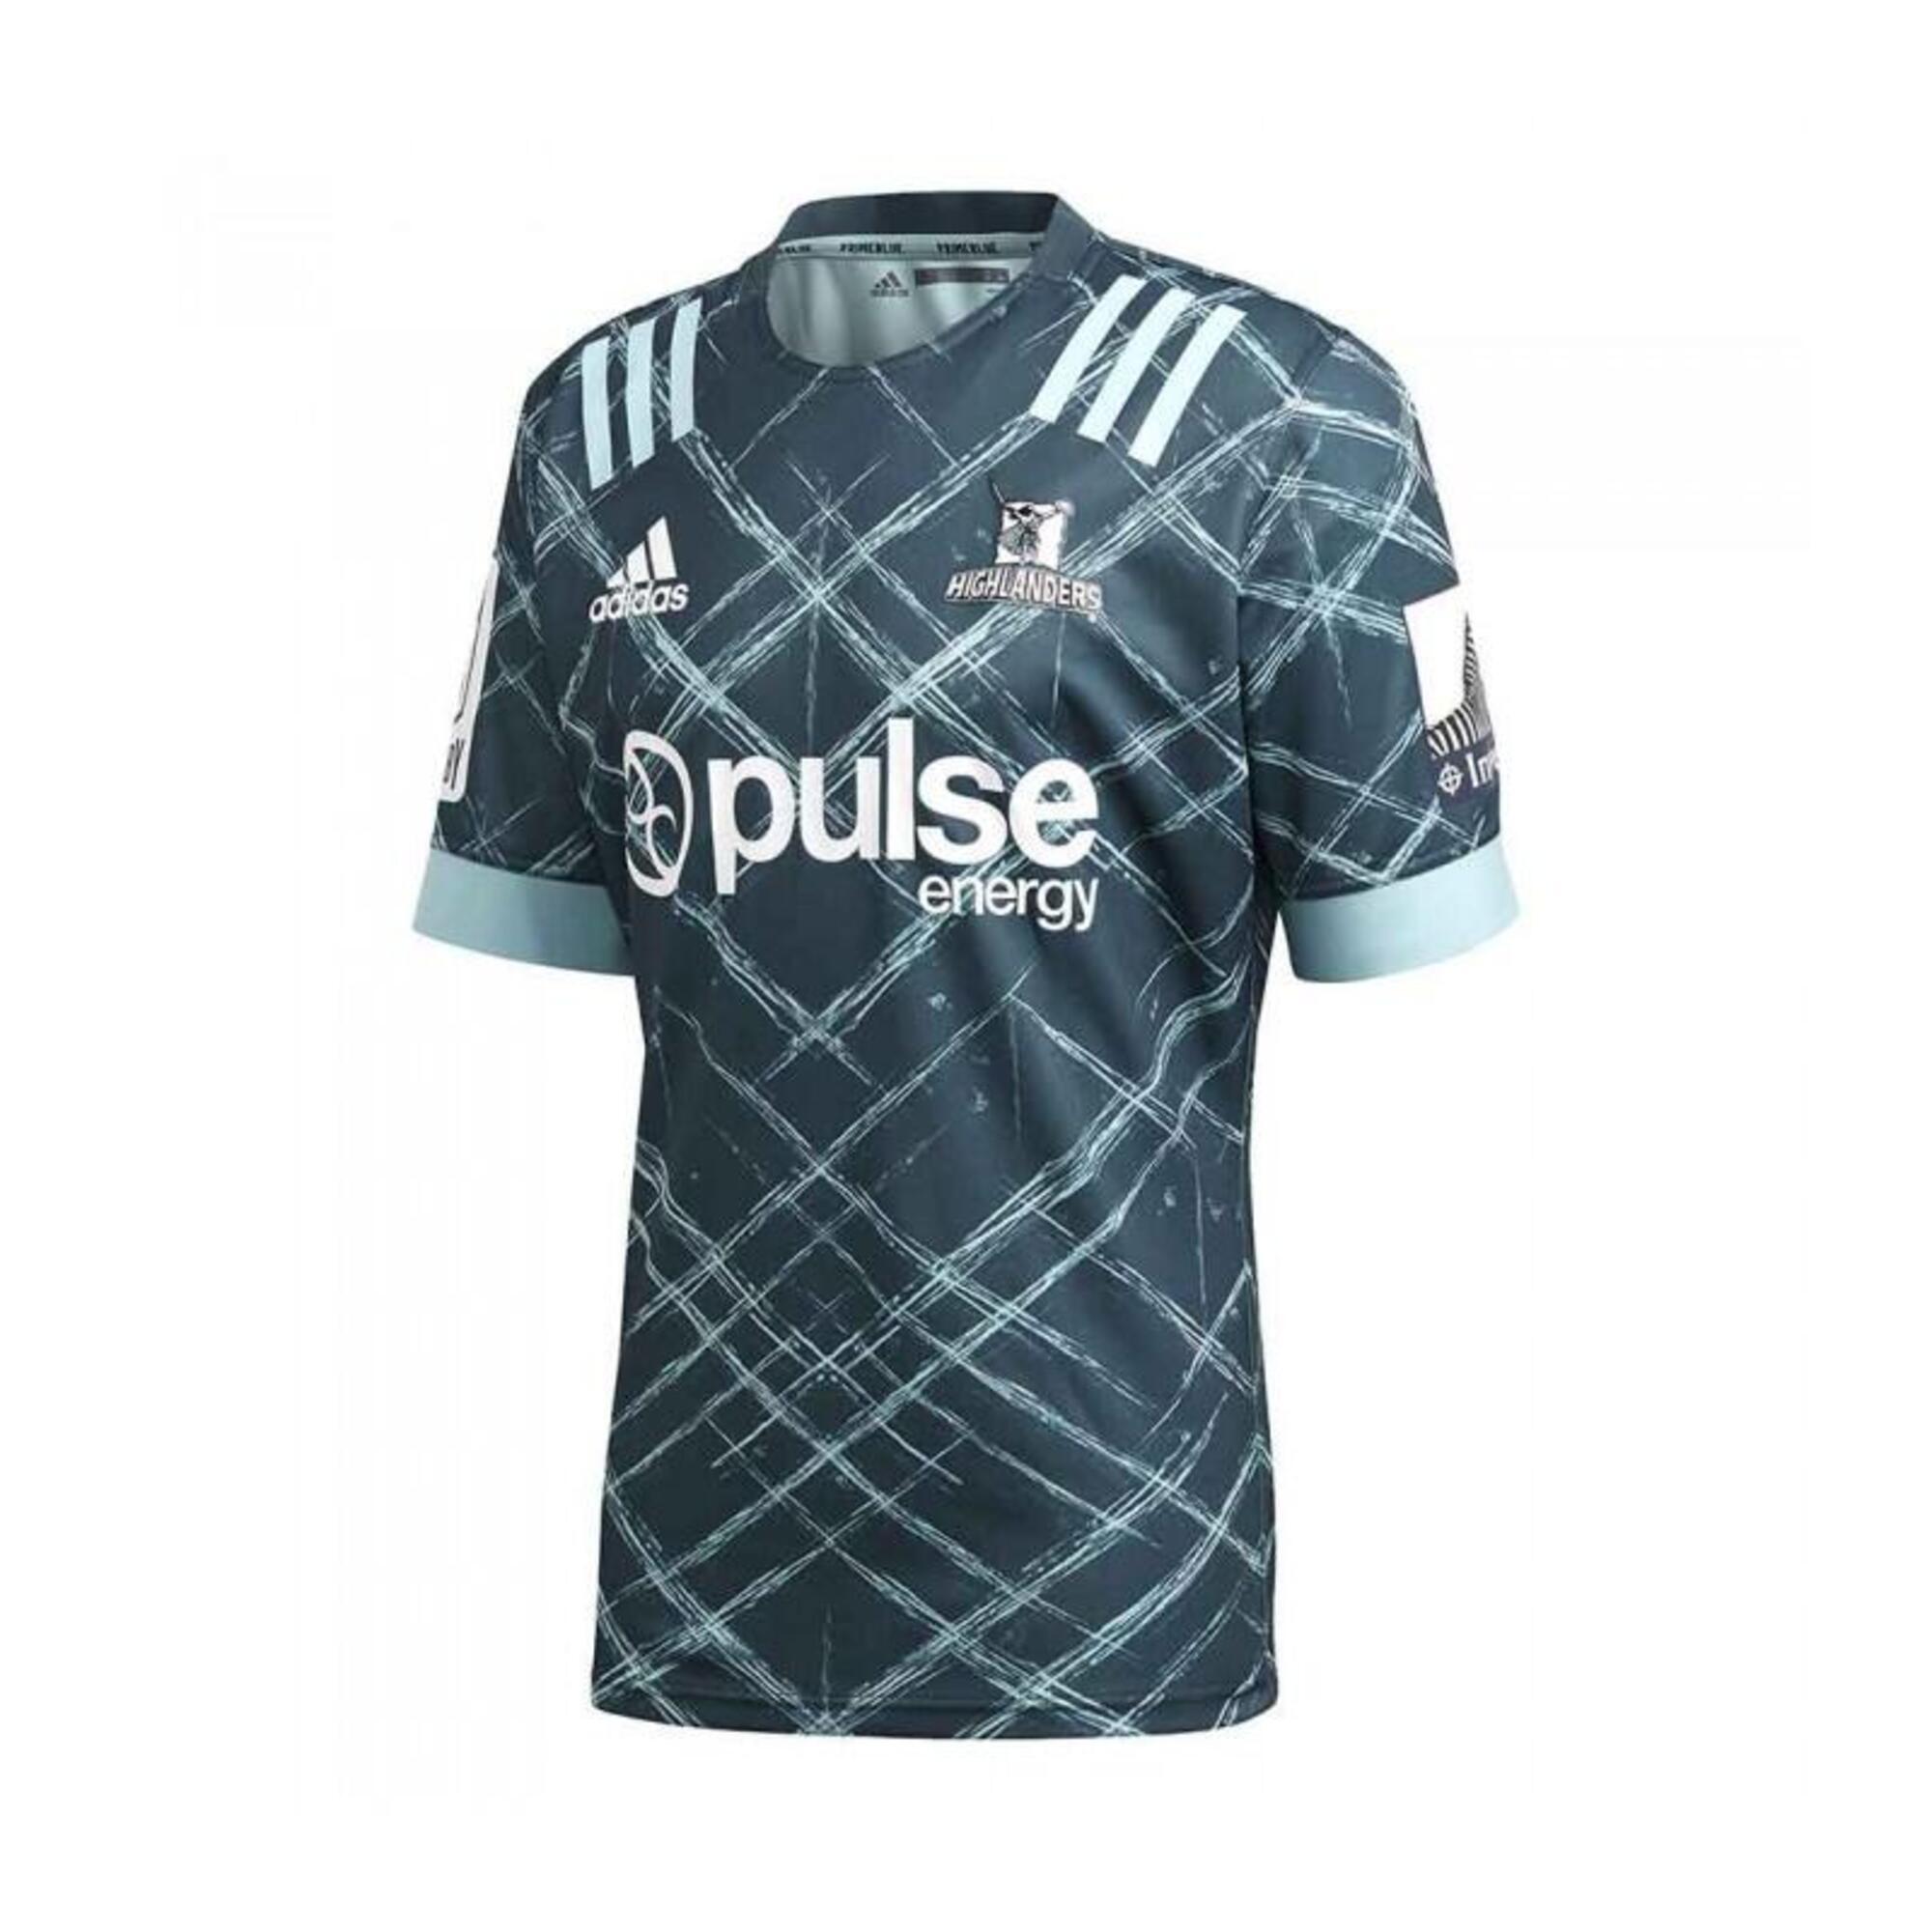 1 MAILLOT RUGBY HIGHLANDERS  - EXTÉRIEUR 2020/2021 HOMME - ADIDAS